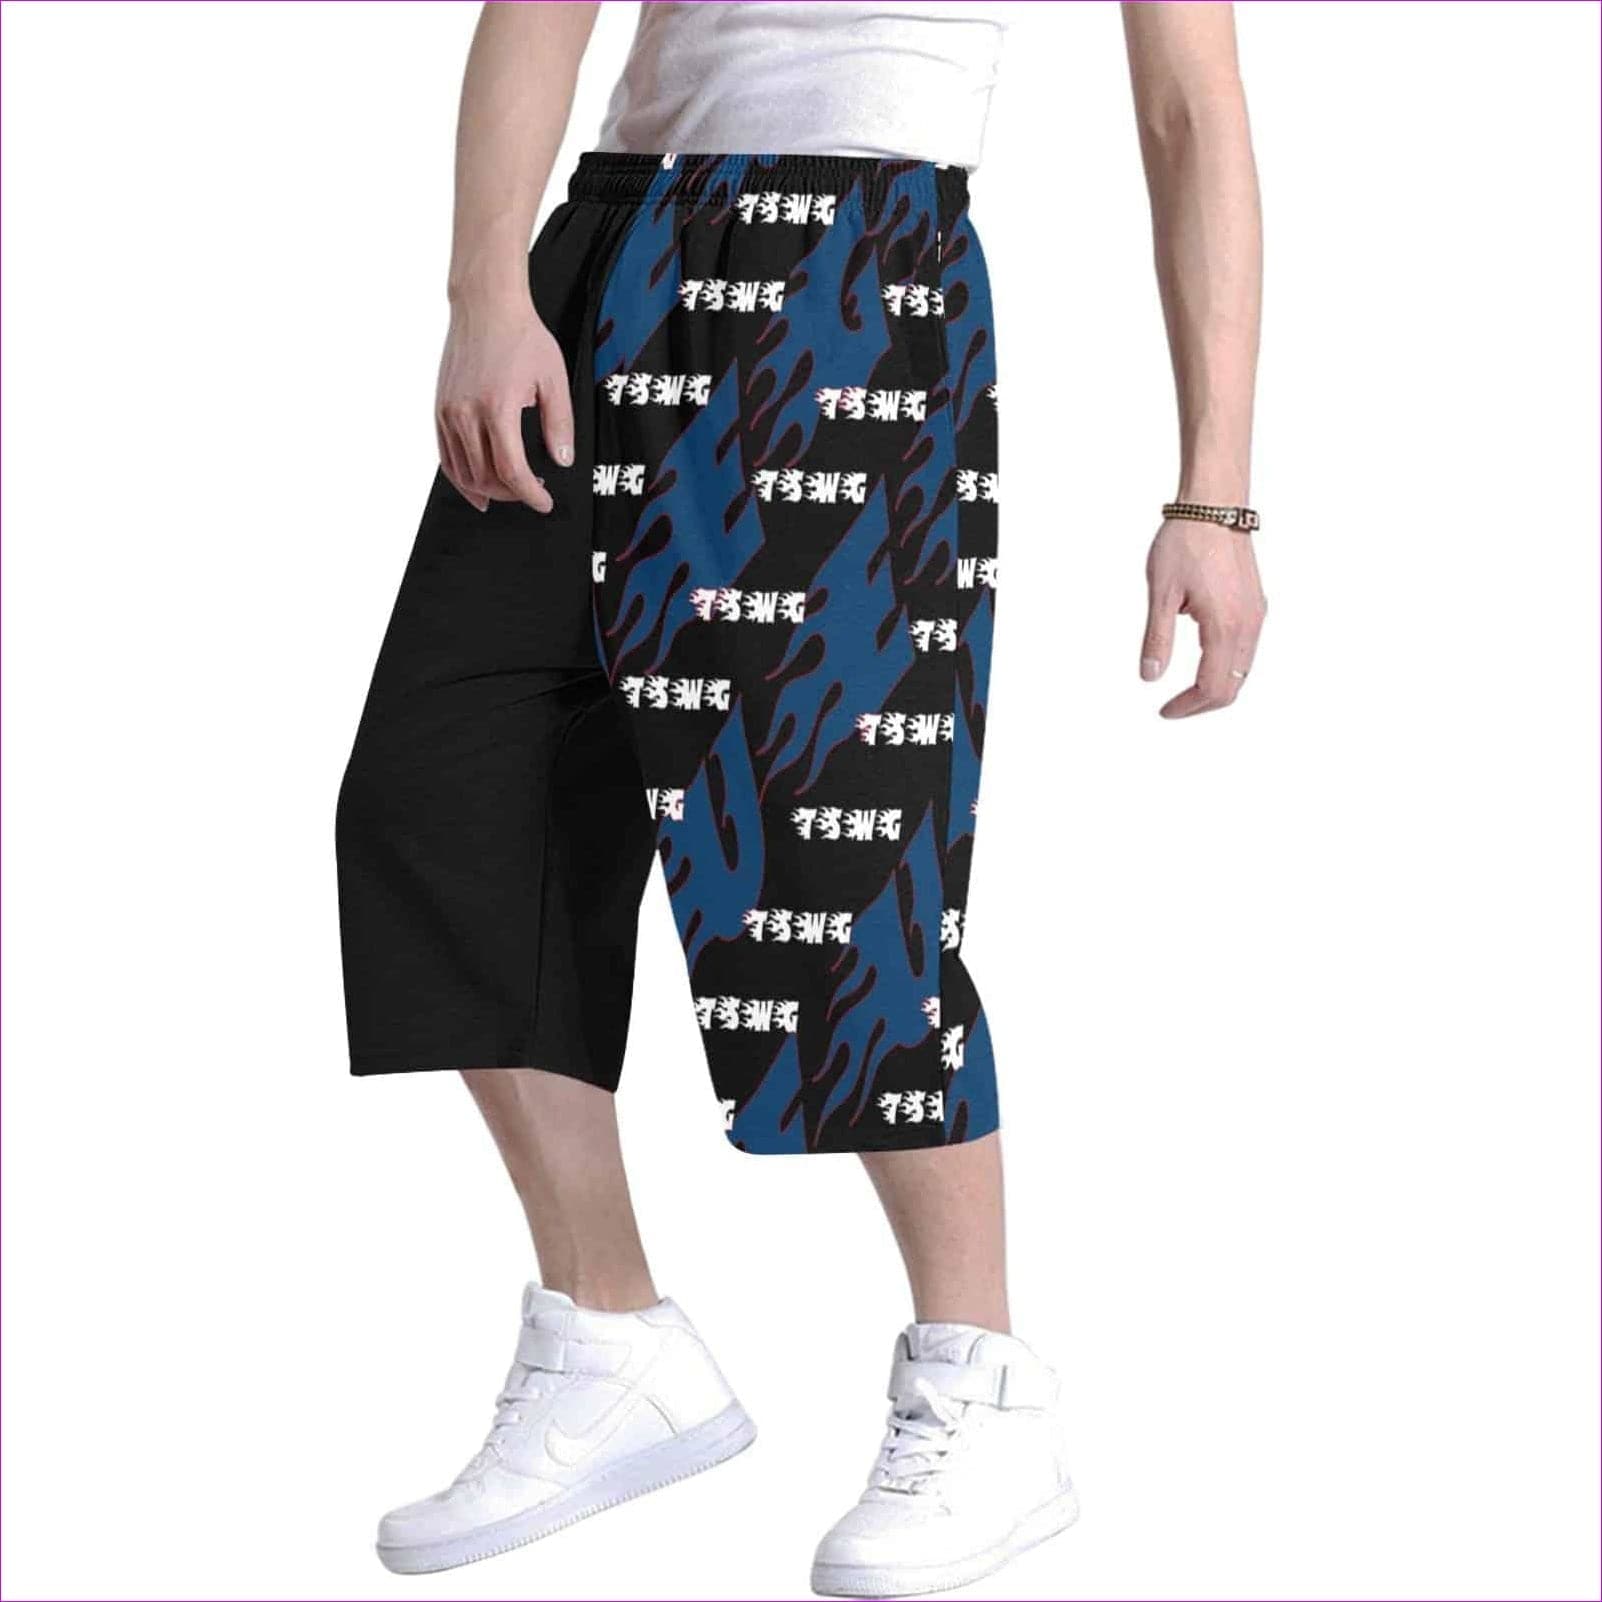 TSWG Fuego Flame - Blue Men's All Over Print Baggy Shorts (Model L37) - TSWG Fuego Flame Men's Baggy Shorts - 2 styles - mens shorts at TFC&H Co.